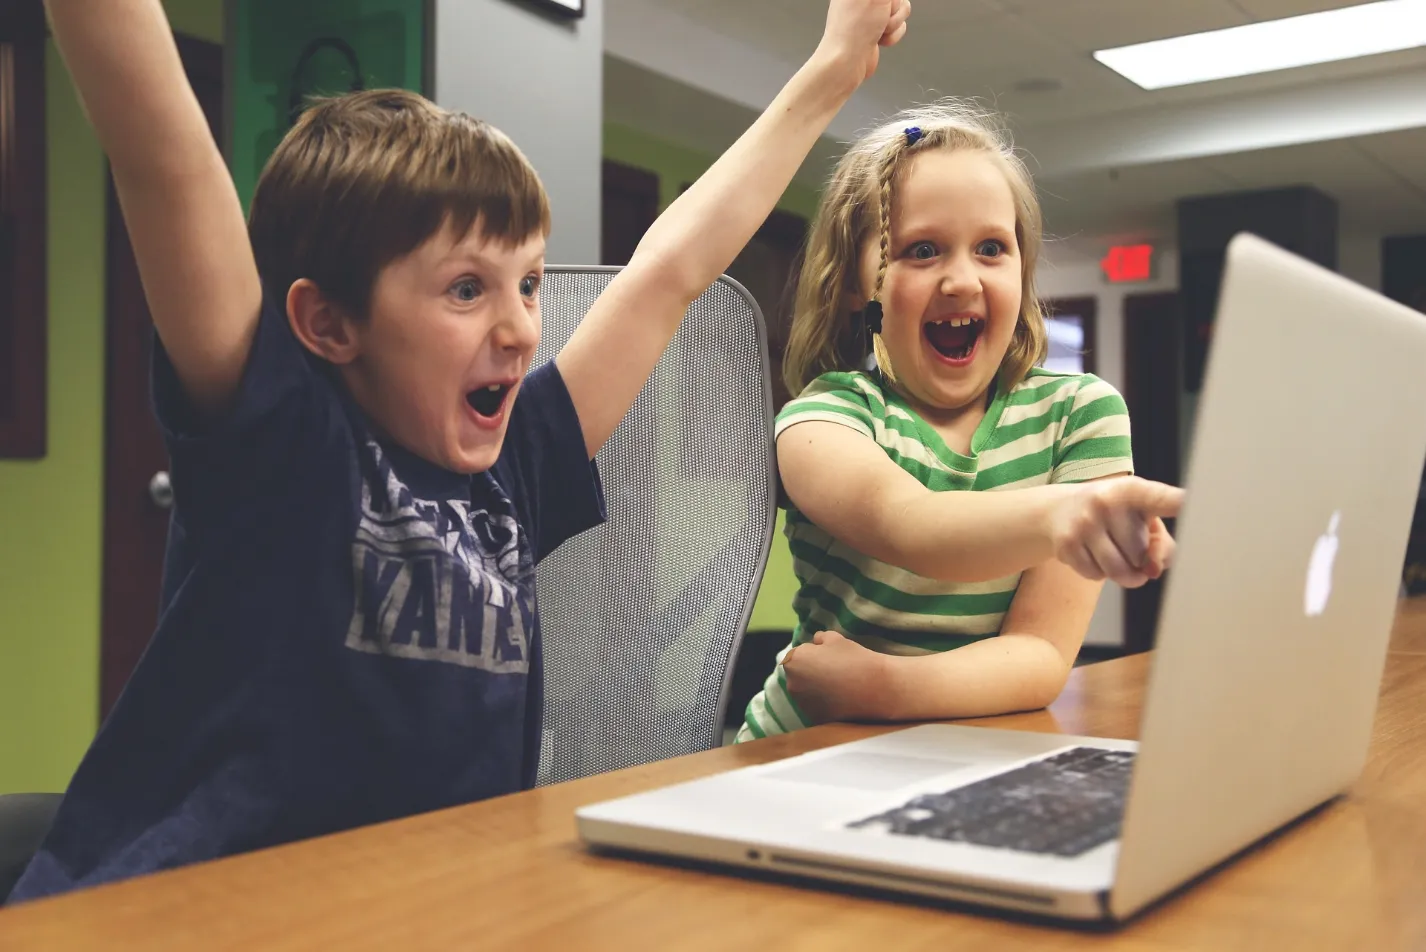 Two children, one boy and one girl, sit attentively in front of a laptop computer, utilizing the advantages of technology.